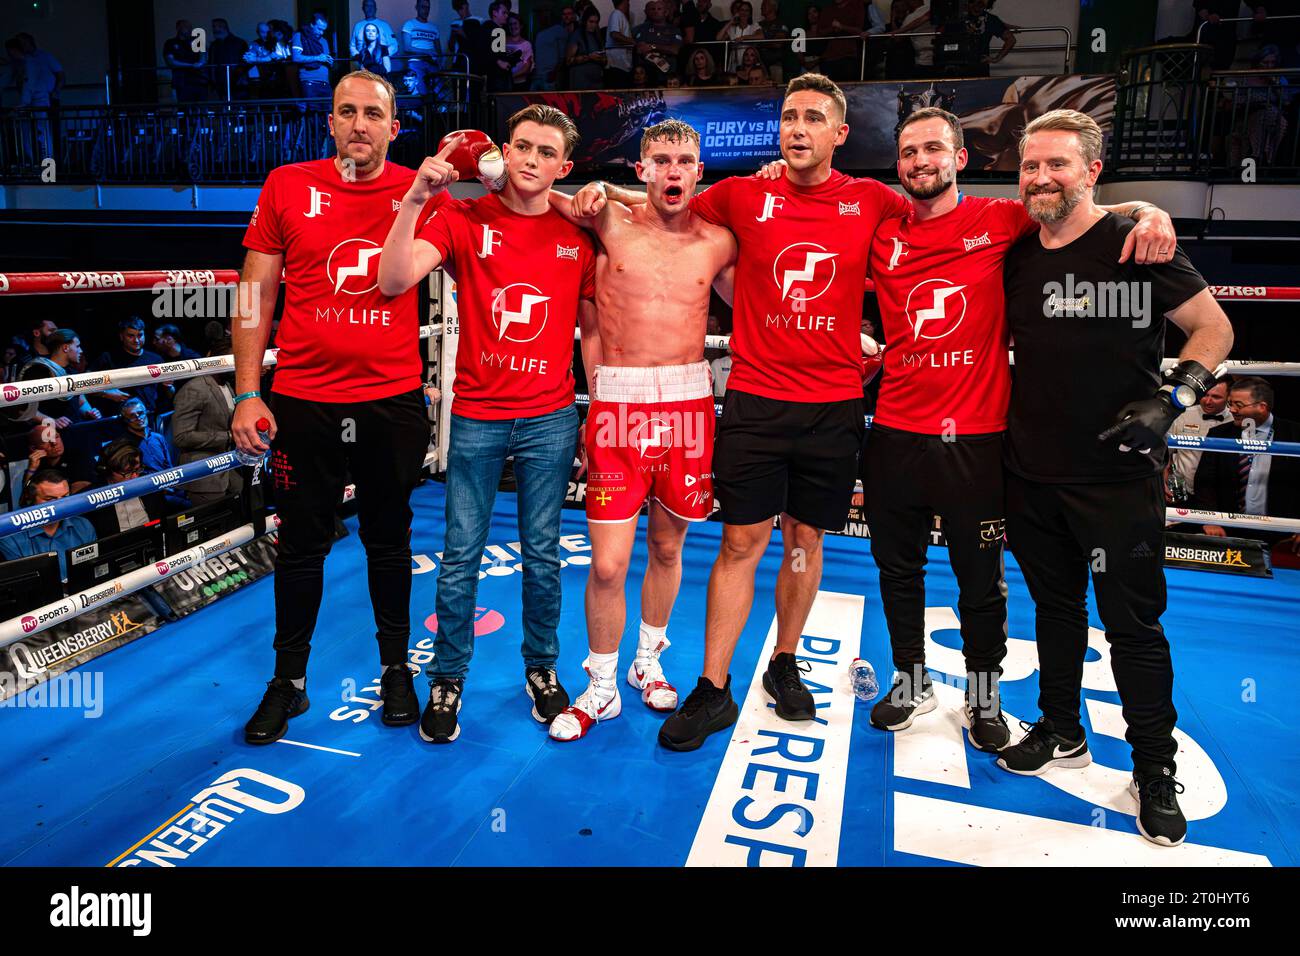 LONDON, UNITED KINGDOM. 06 Oct, 23. Joshua Frankham vs George Davey - Rounds Super-Welterweight Contest  during Zorro vs D'Ortenzi Fight Night and undercards at York Hall on Friday, October 06, 2023 in LONDON, ENGLAND. Credit: Taka G Wu/Alamy Live News Stock Photo